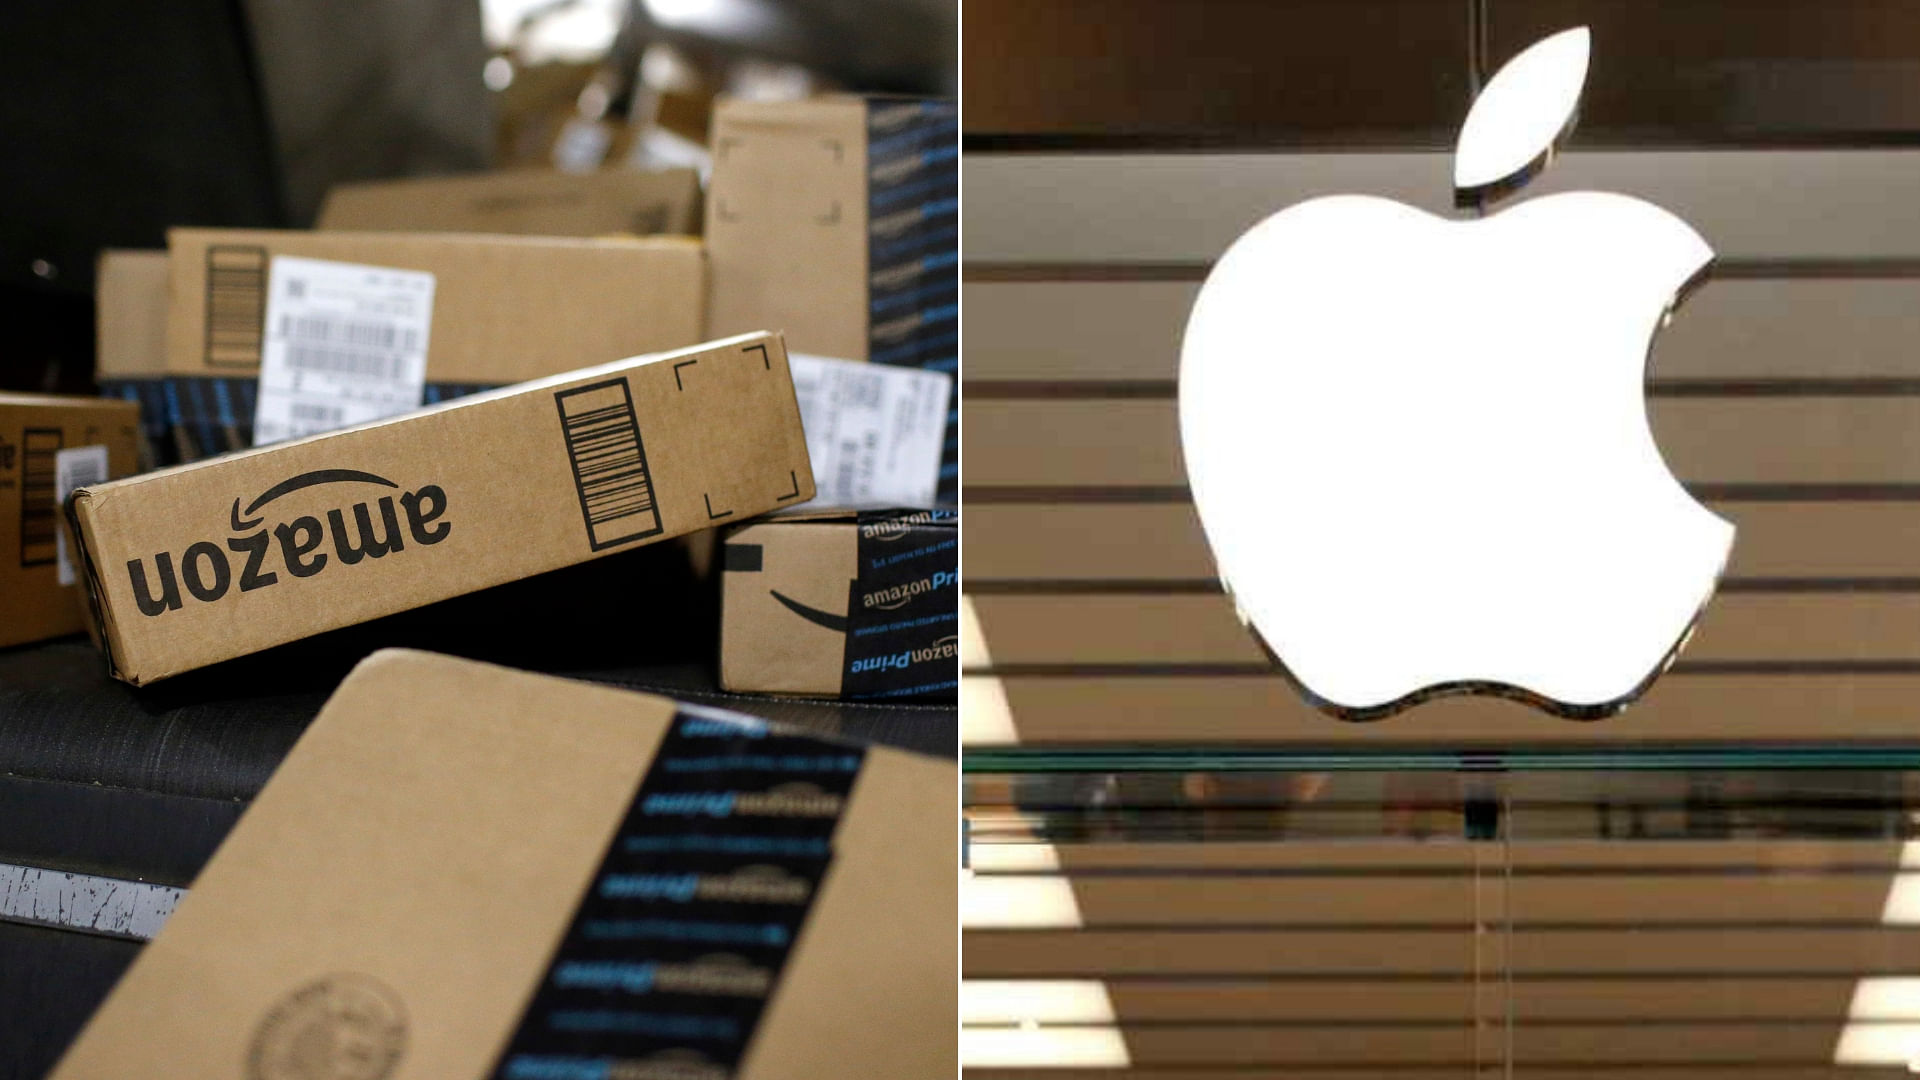 Amazon has signed a deal to sell a wider portfolio of Apple products on its sites worldwide.